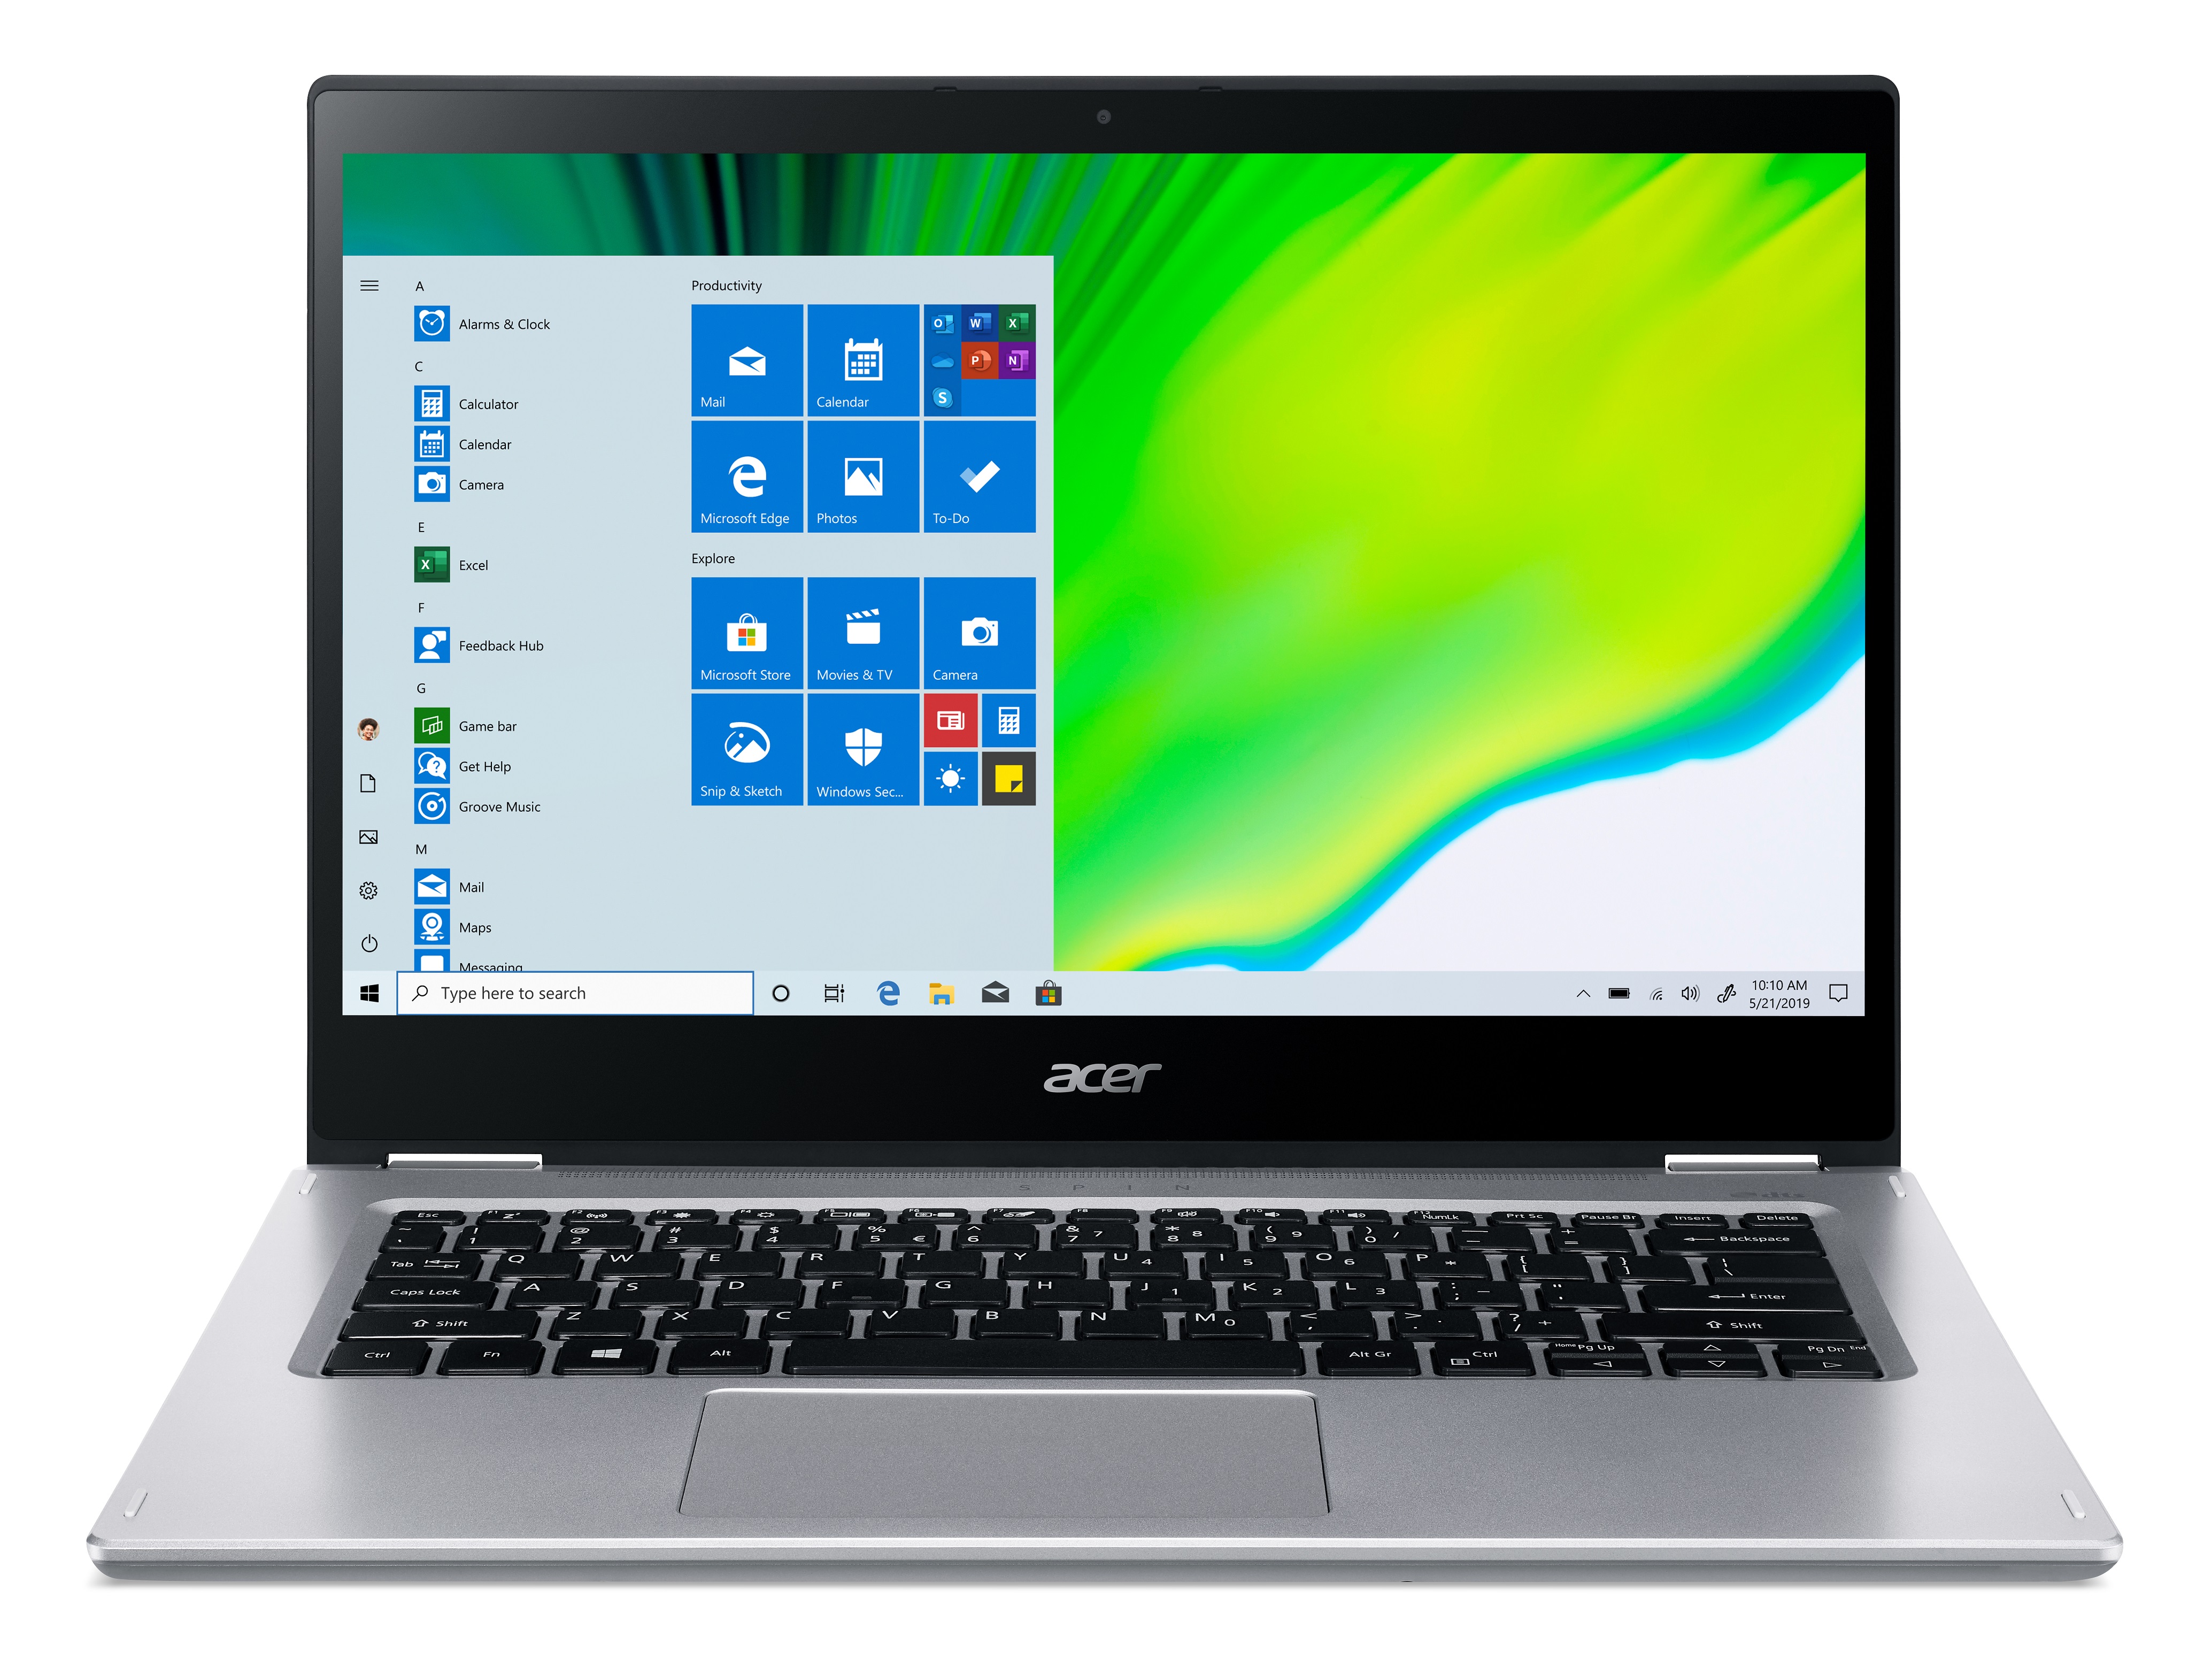 Acer Spin 3 Thin and Light Convertible 2-in-1, 14" HD Touch, AMD Ryzen 3 3250U Dual-Core Mobile Processor with Radeon Graphics, 4GB DDR4, 128GB NVMe SSD, Windows 10 in S mode, SP314-21-R56W - image 3 of 8